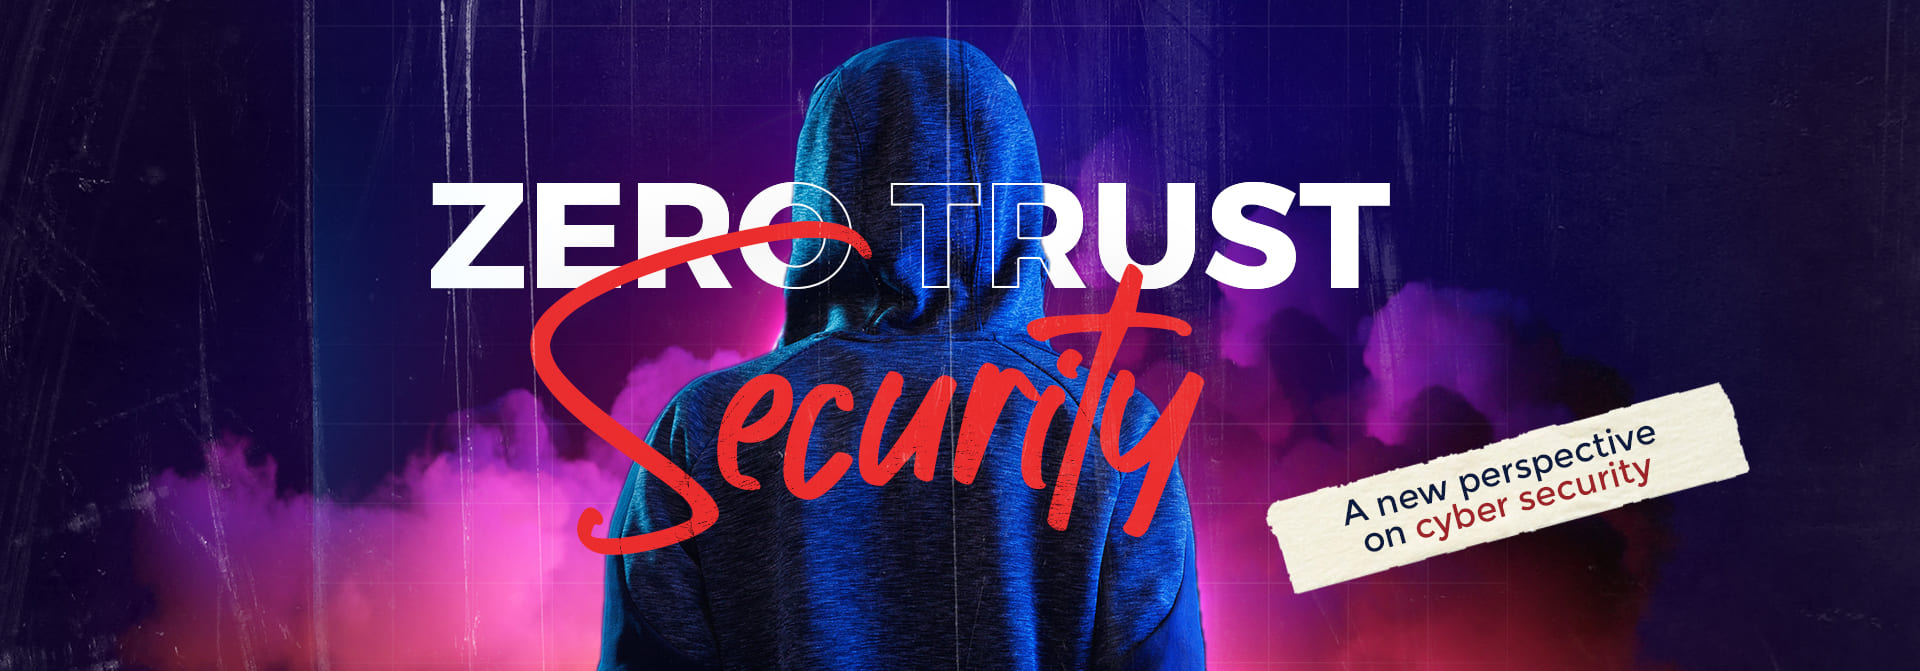 ZERO TRUST SECURITY : A New Perspective on Cybersecurity